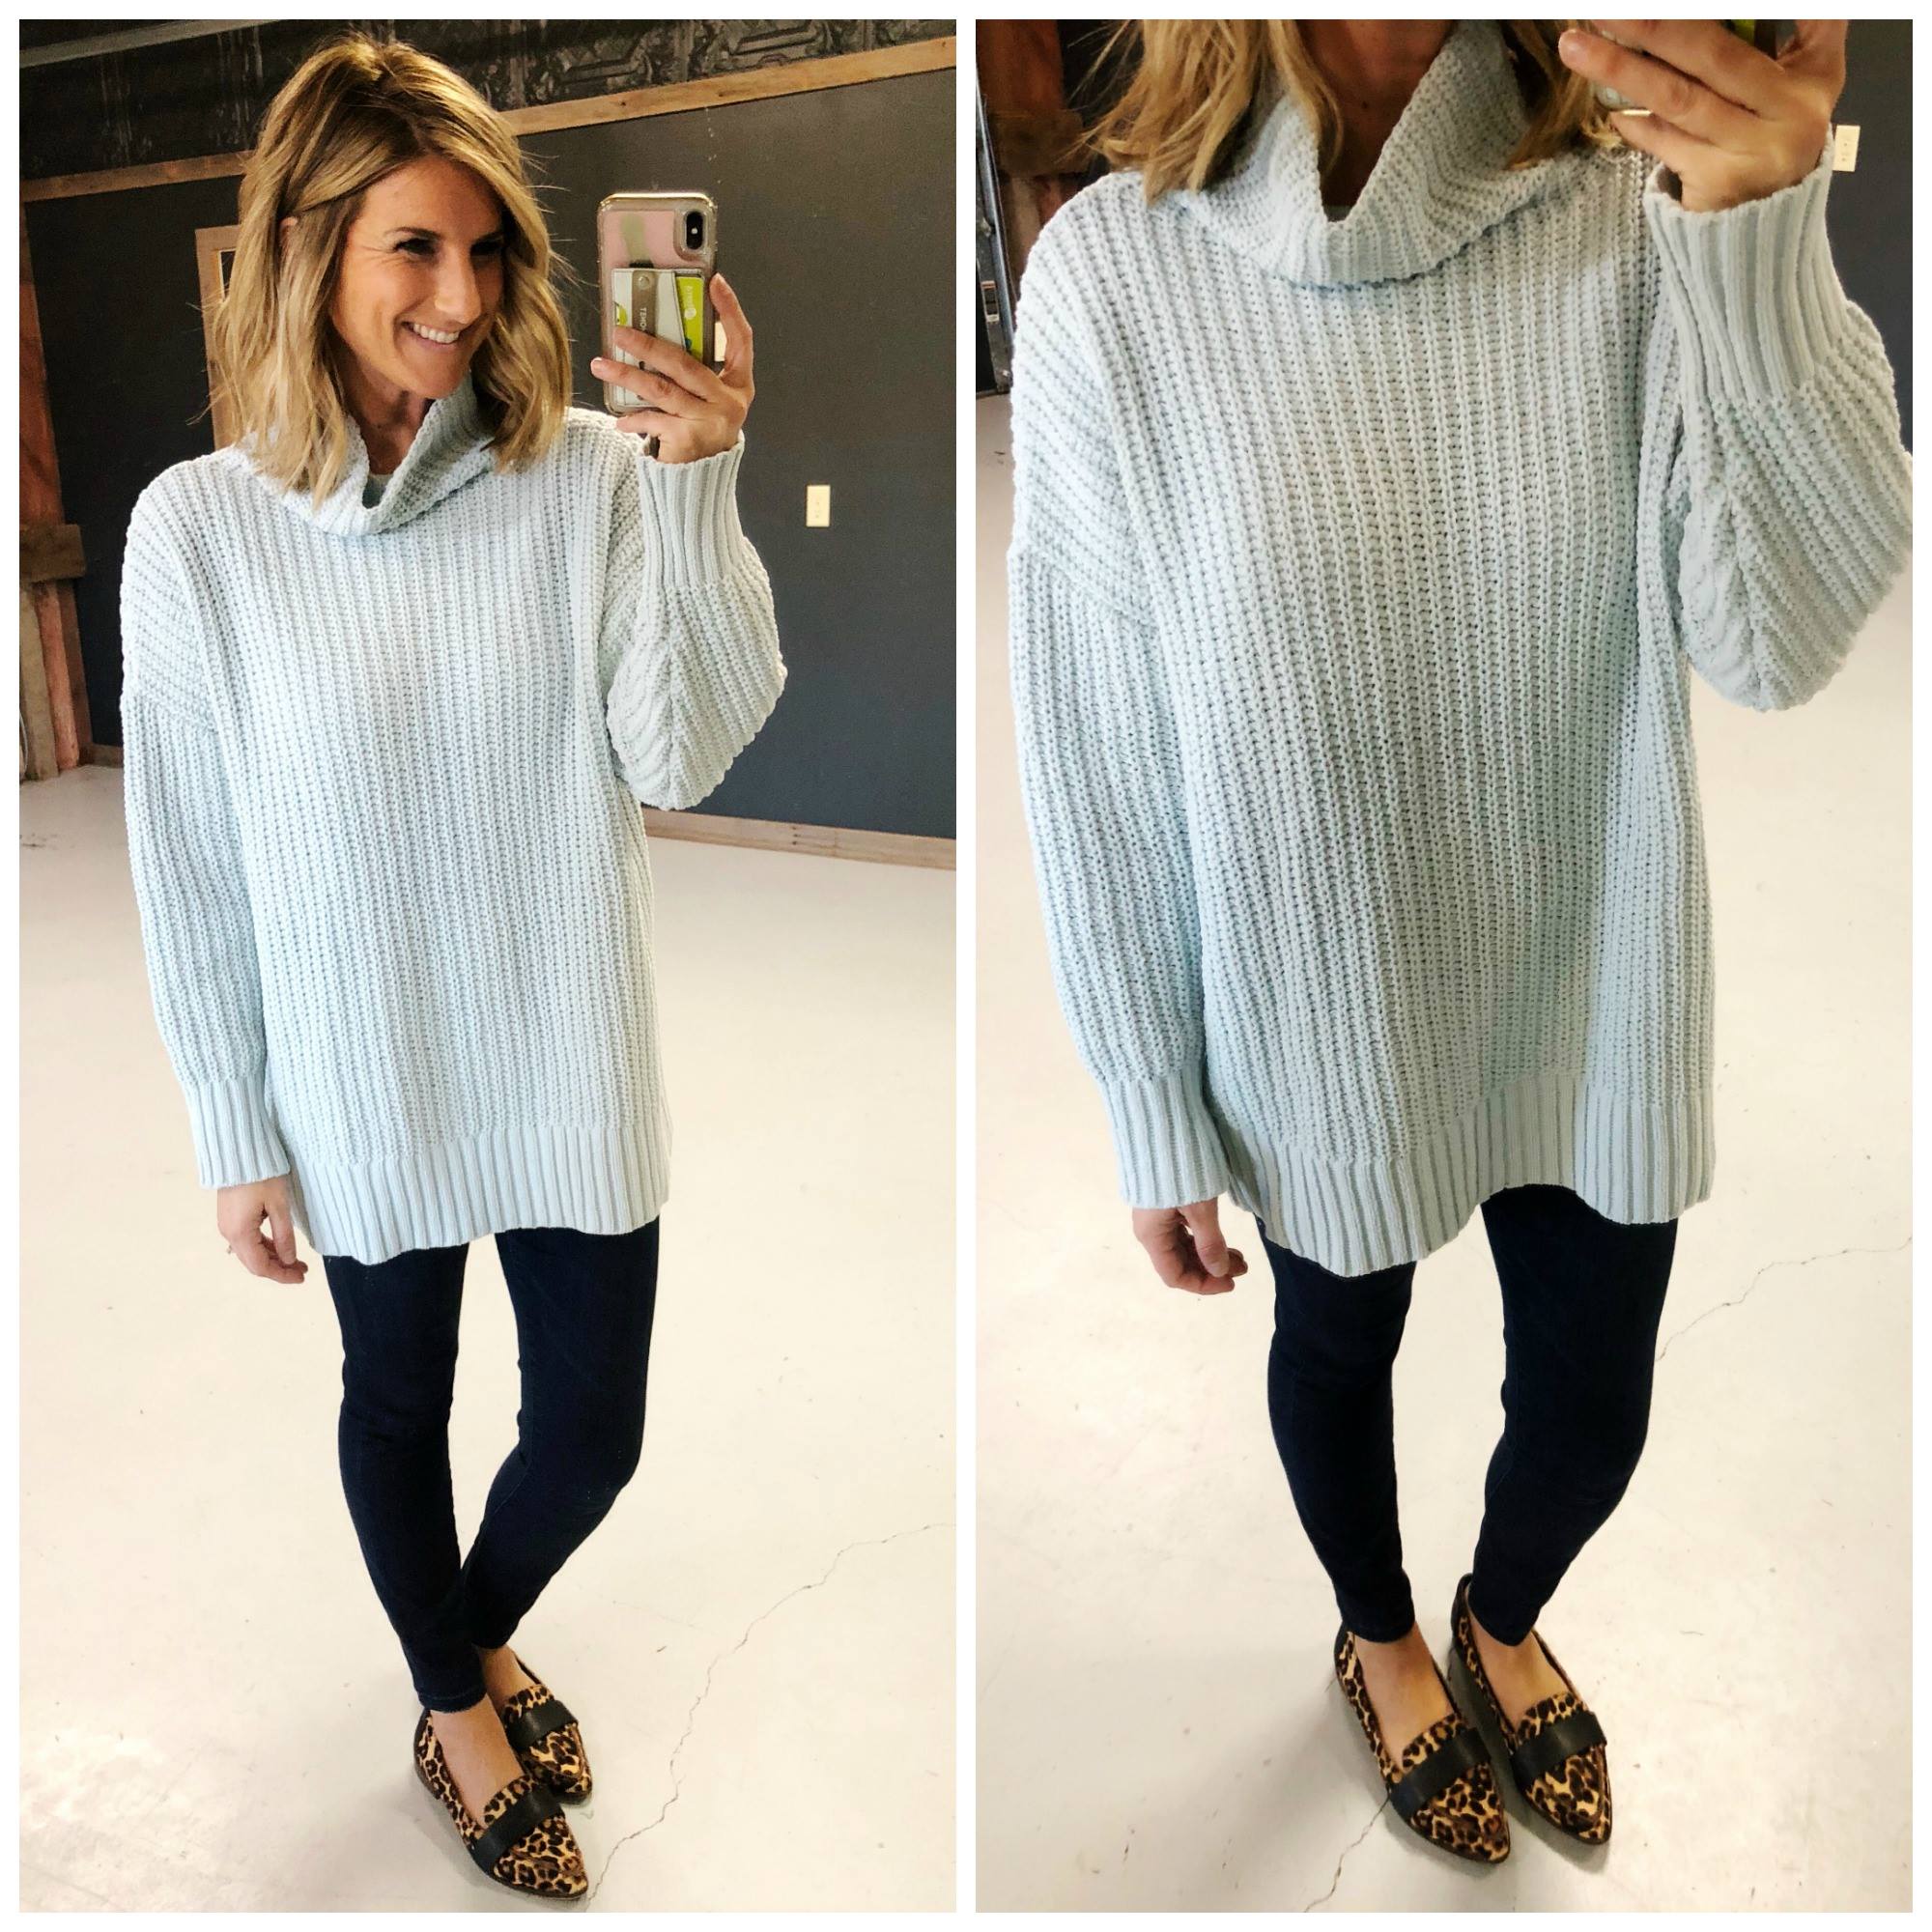 Oversized Sweater // Turtleneck Sweater // Pull On Skinny Jeans // Winter Fashion // Casual Winter Style